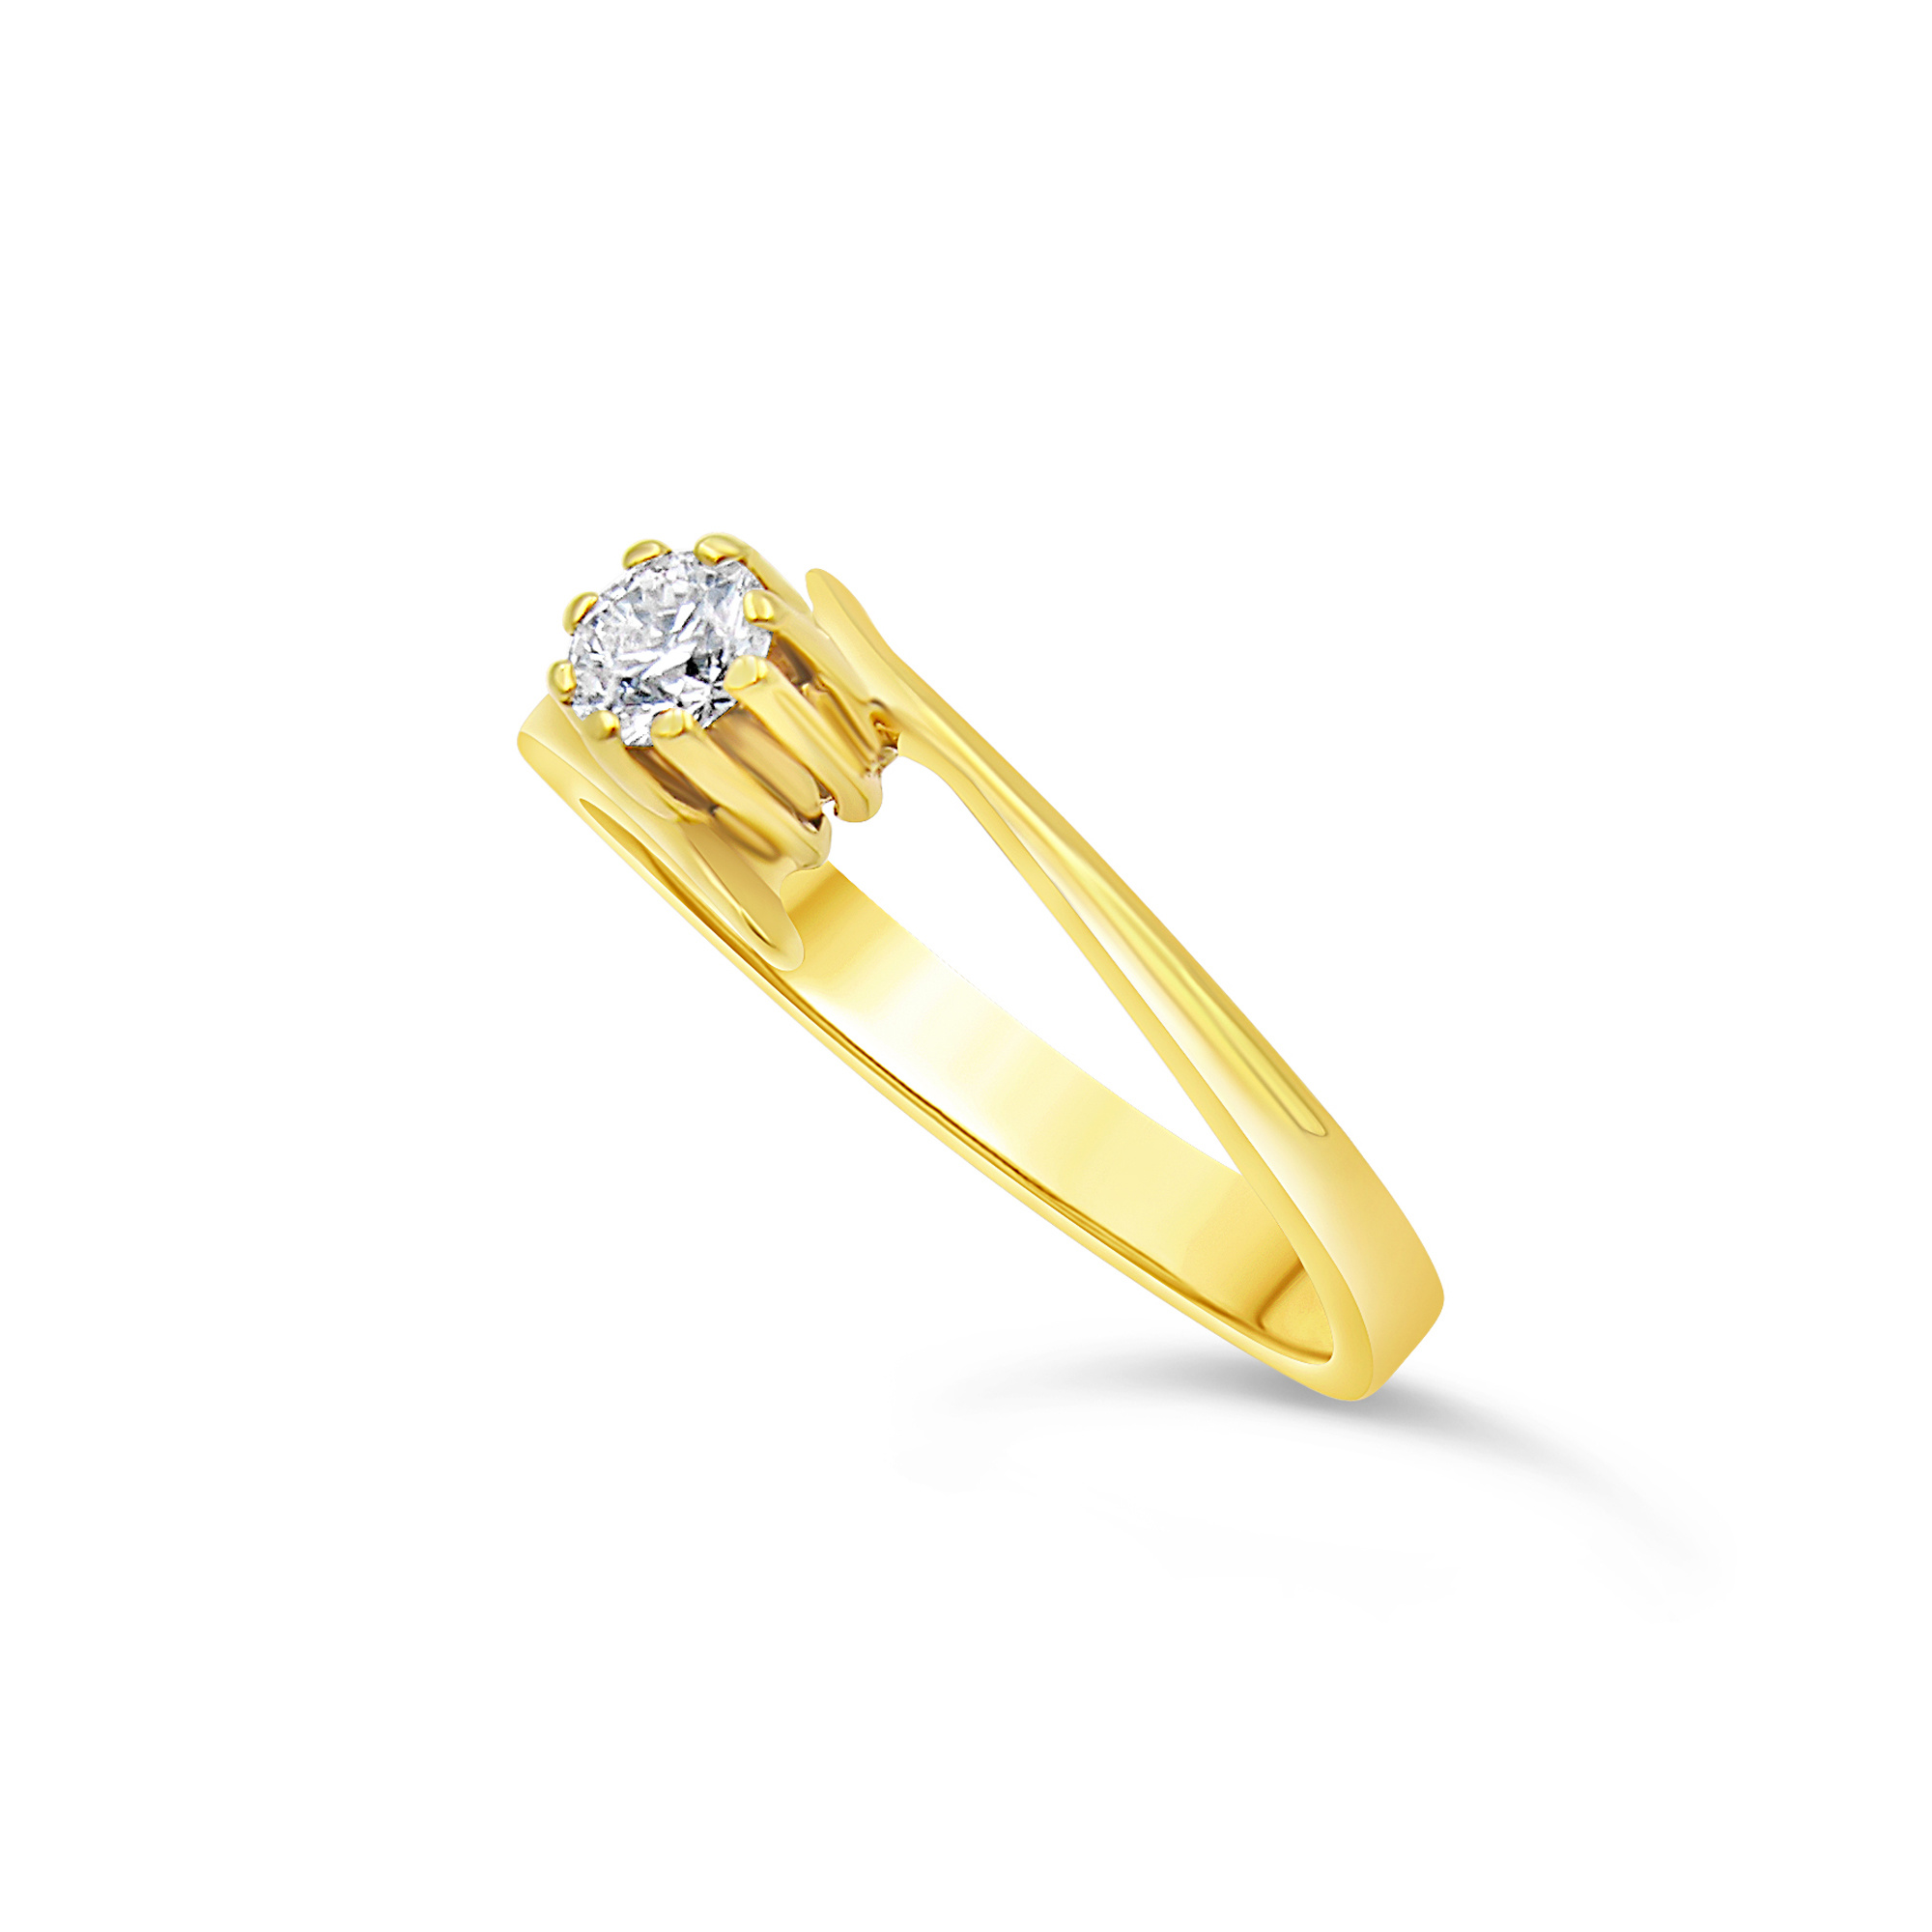 18kt yellow gold engagement ring with 0.24 ct diamond